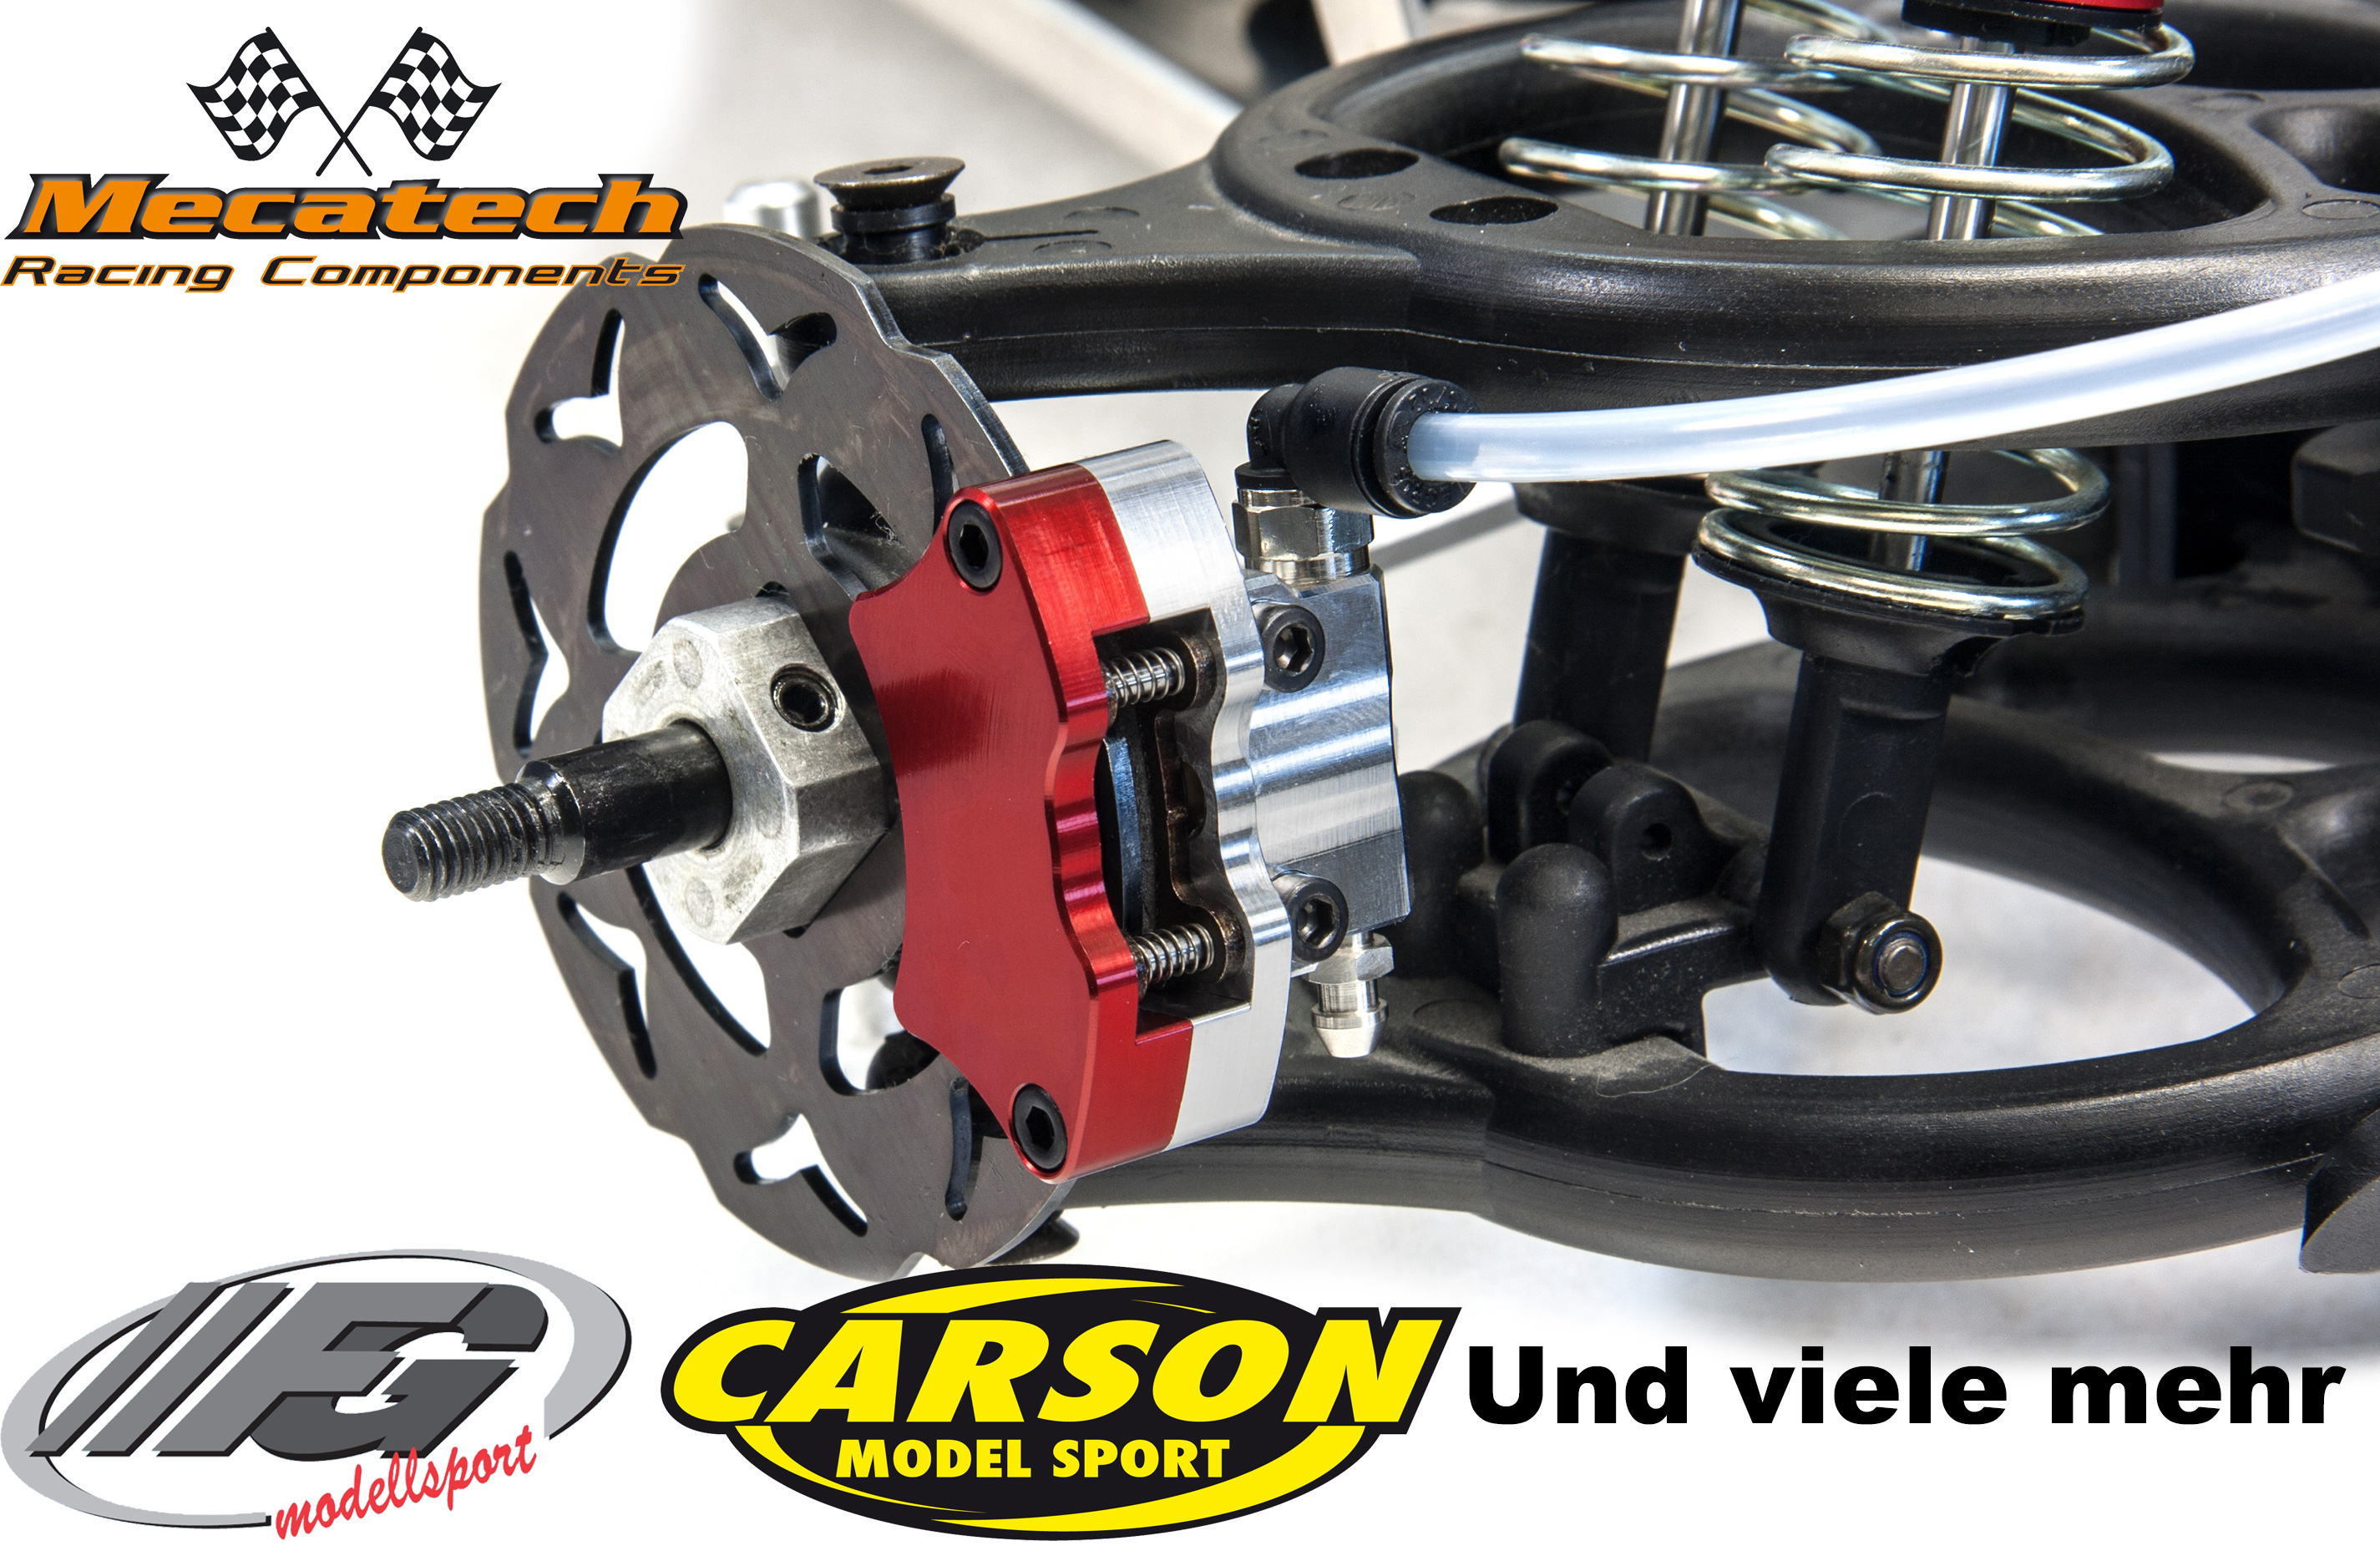 y1129 Mecatech hydraulic brake Expert for FG, Carson and many more, incl. brake bleeding set